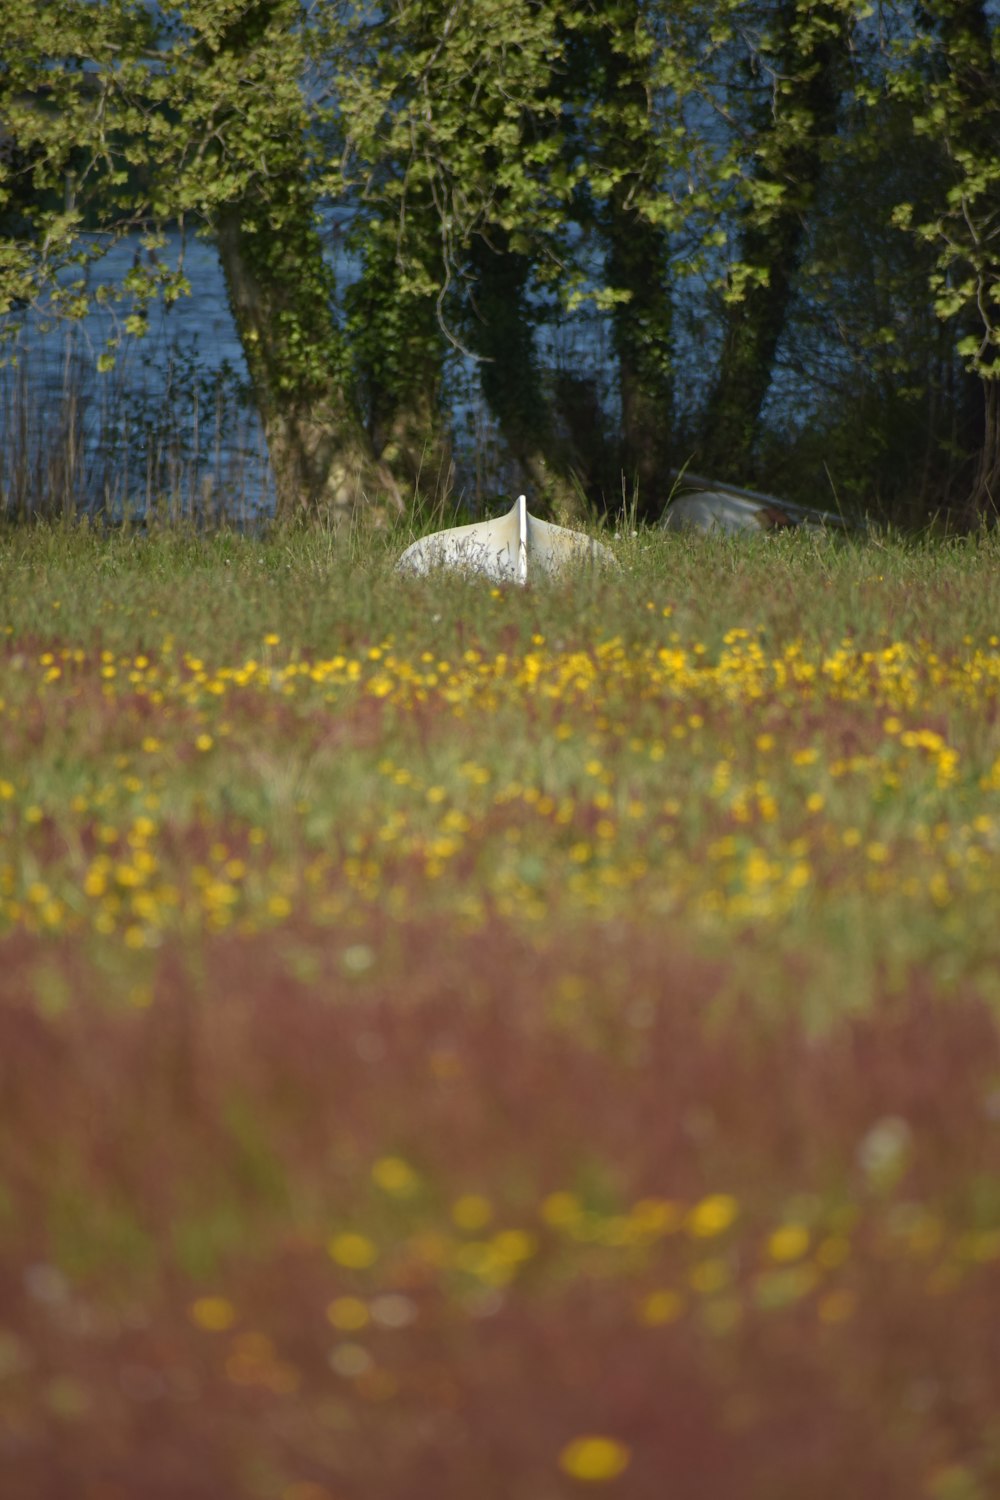 a white swan is sitting in a field of flowers